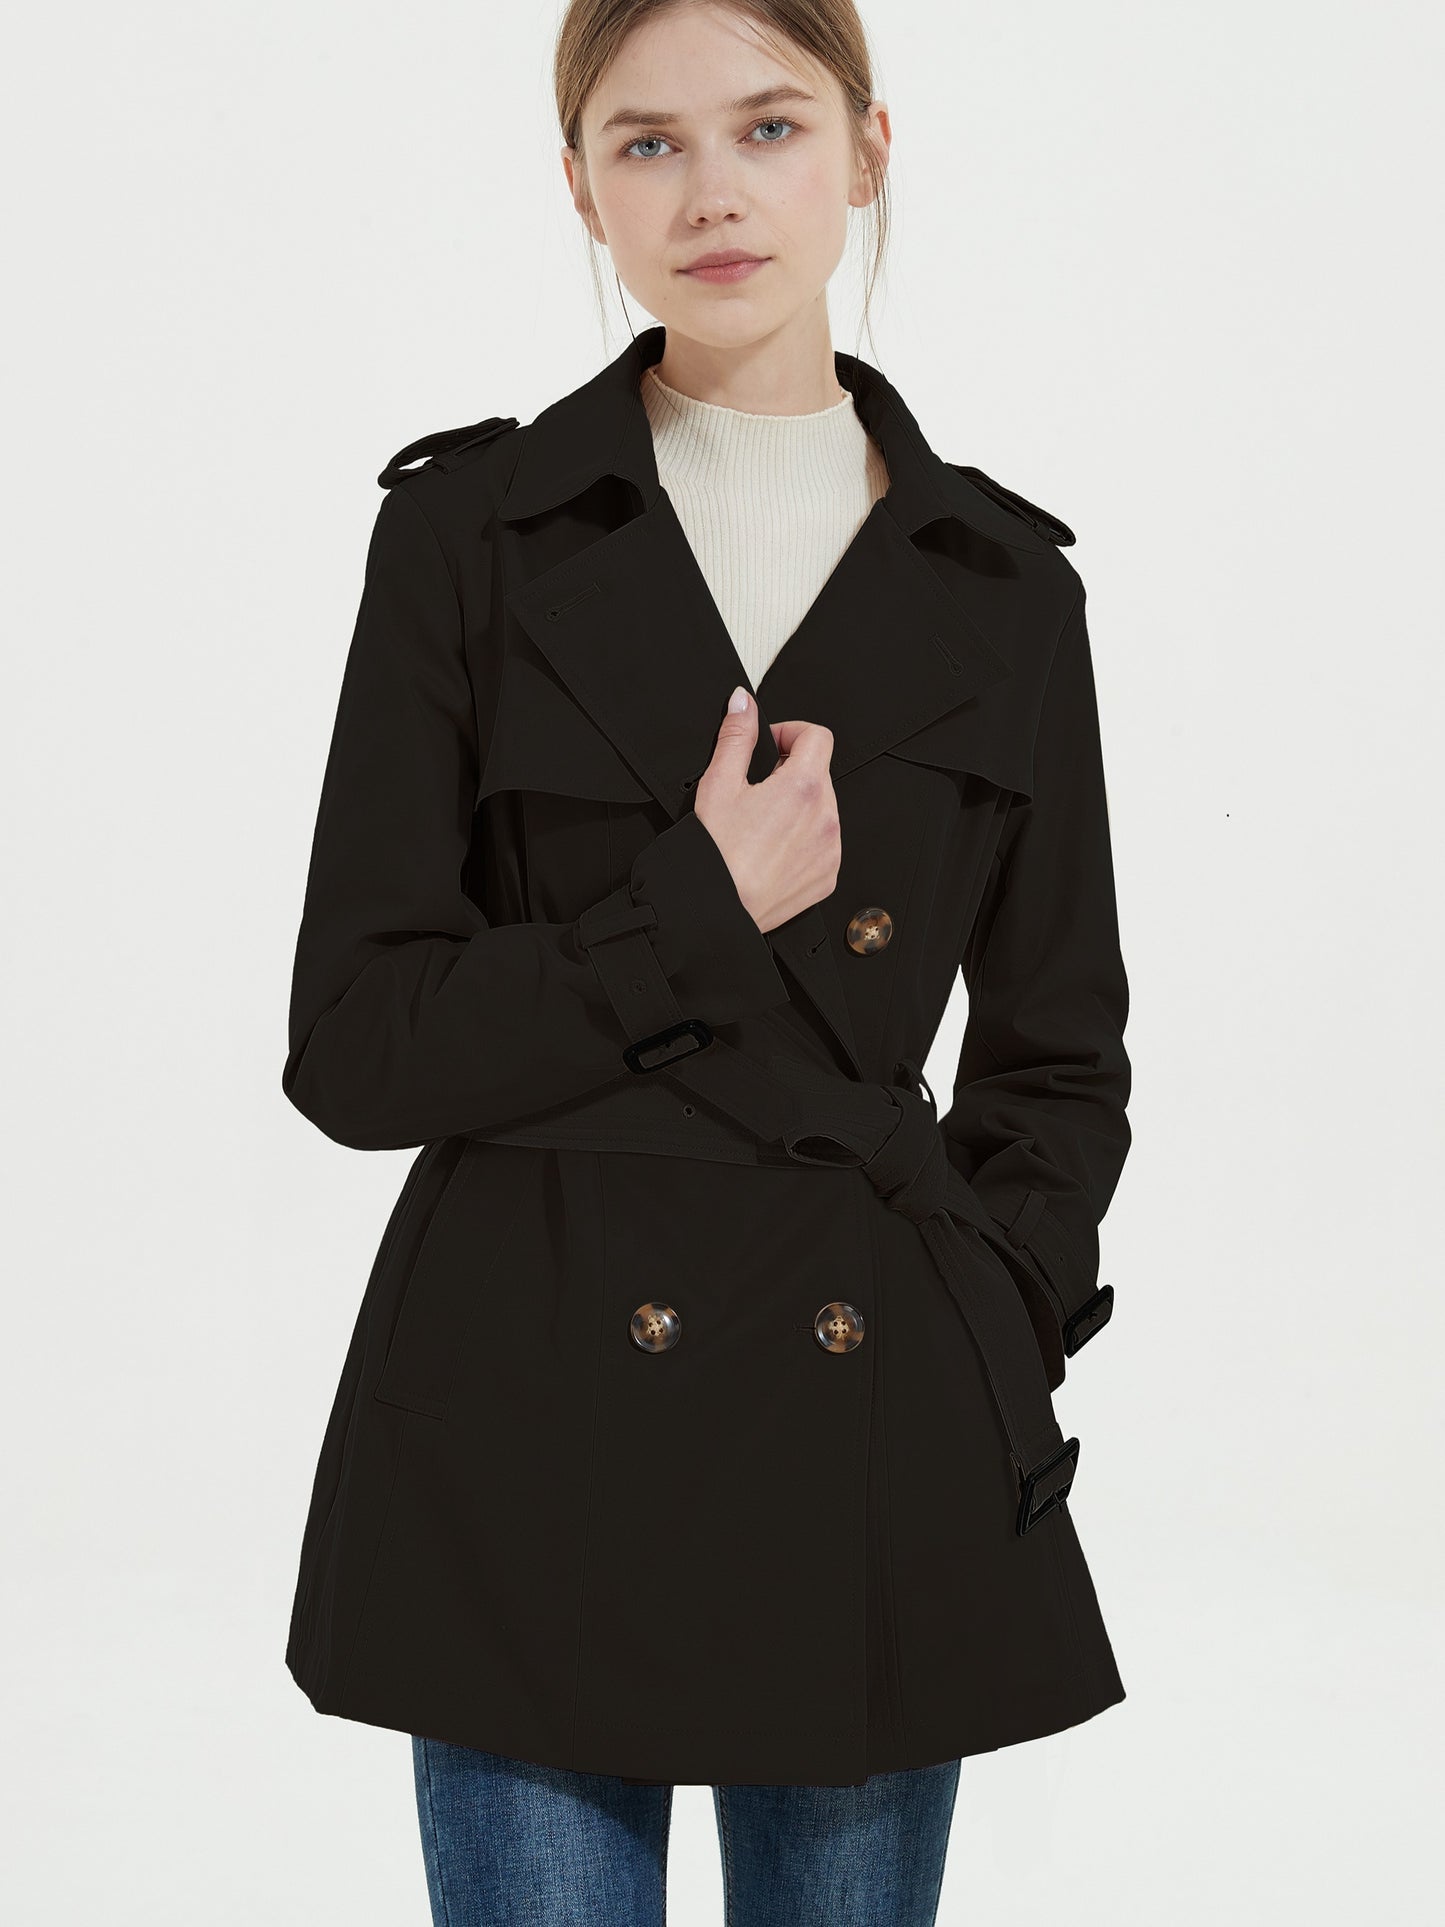 Antmvs Women's Spring Trench Coat, Windproof Short Casual Coat With Belt Button Women's Trench Coats